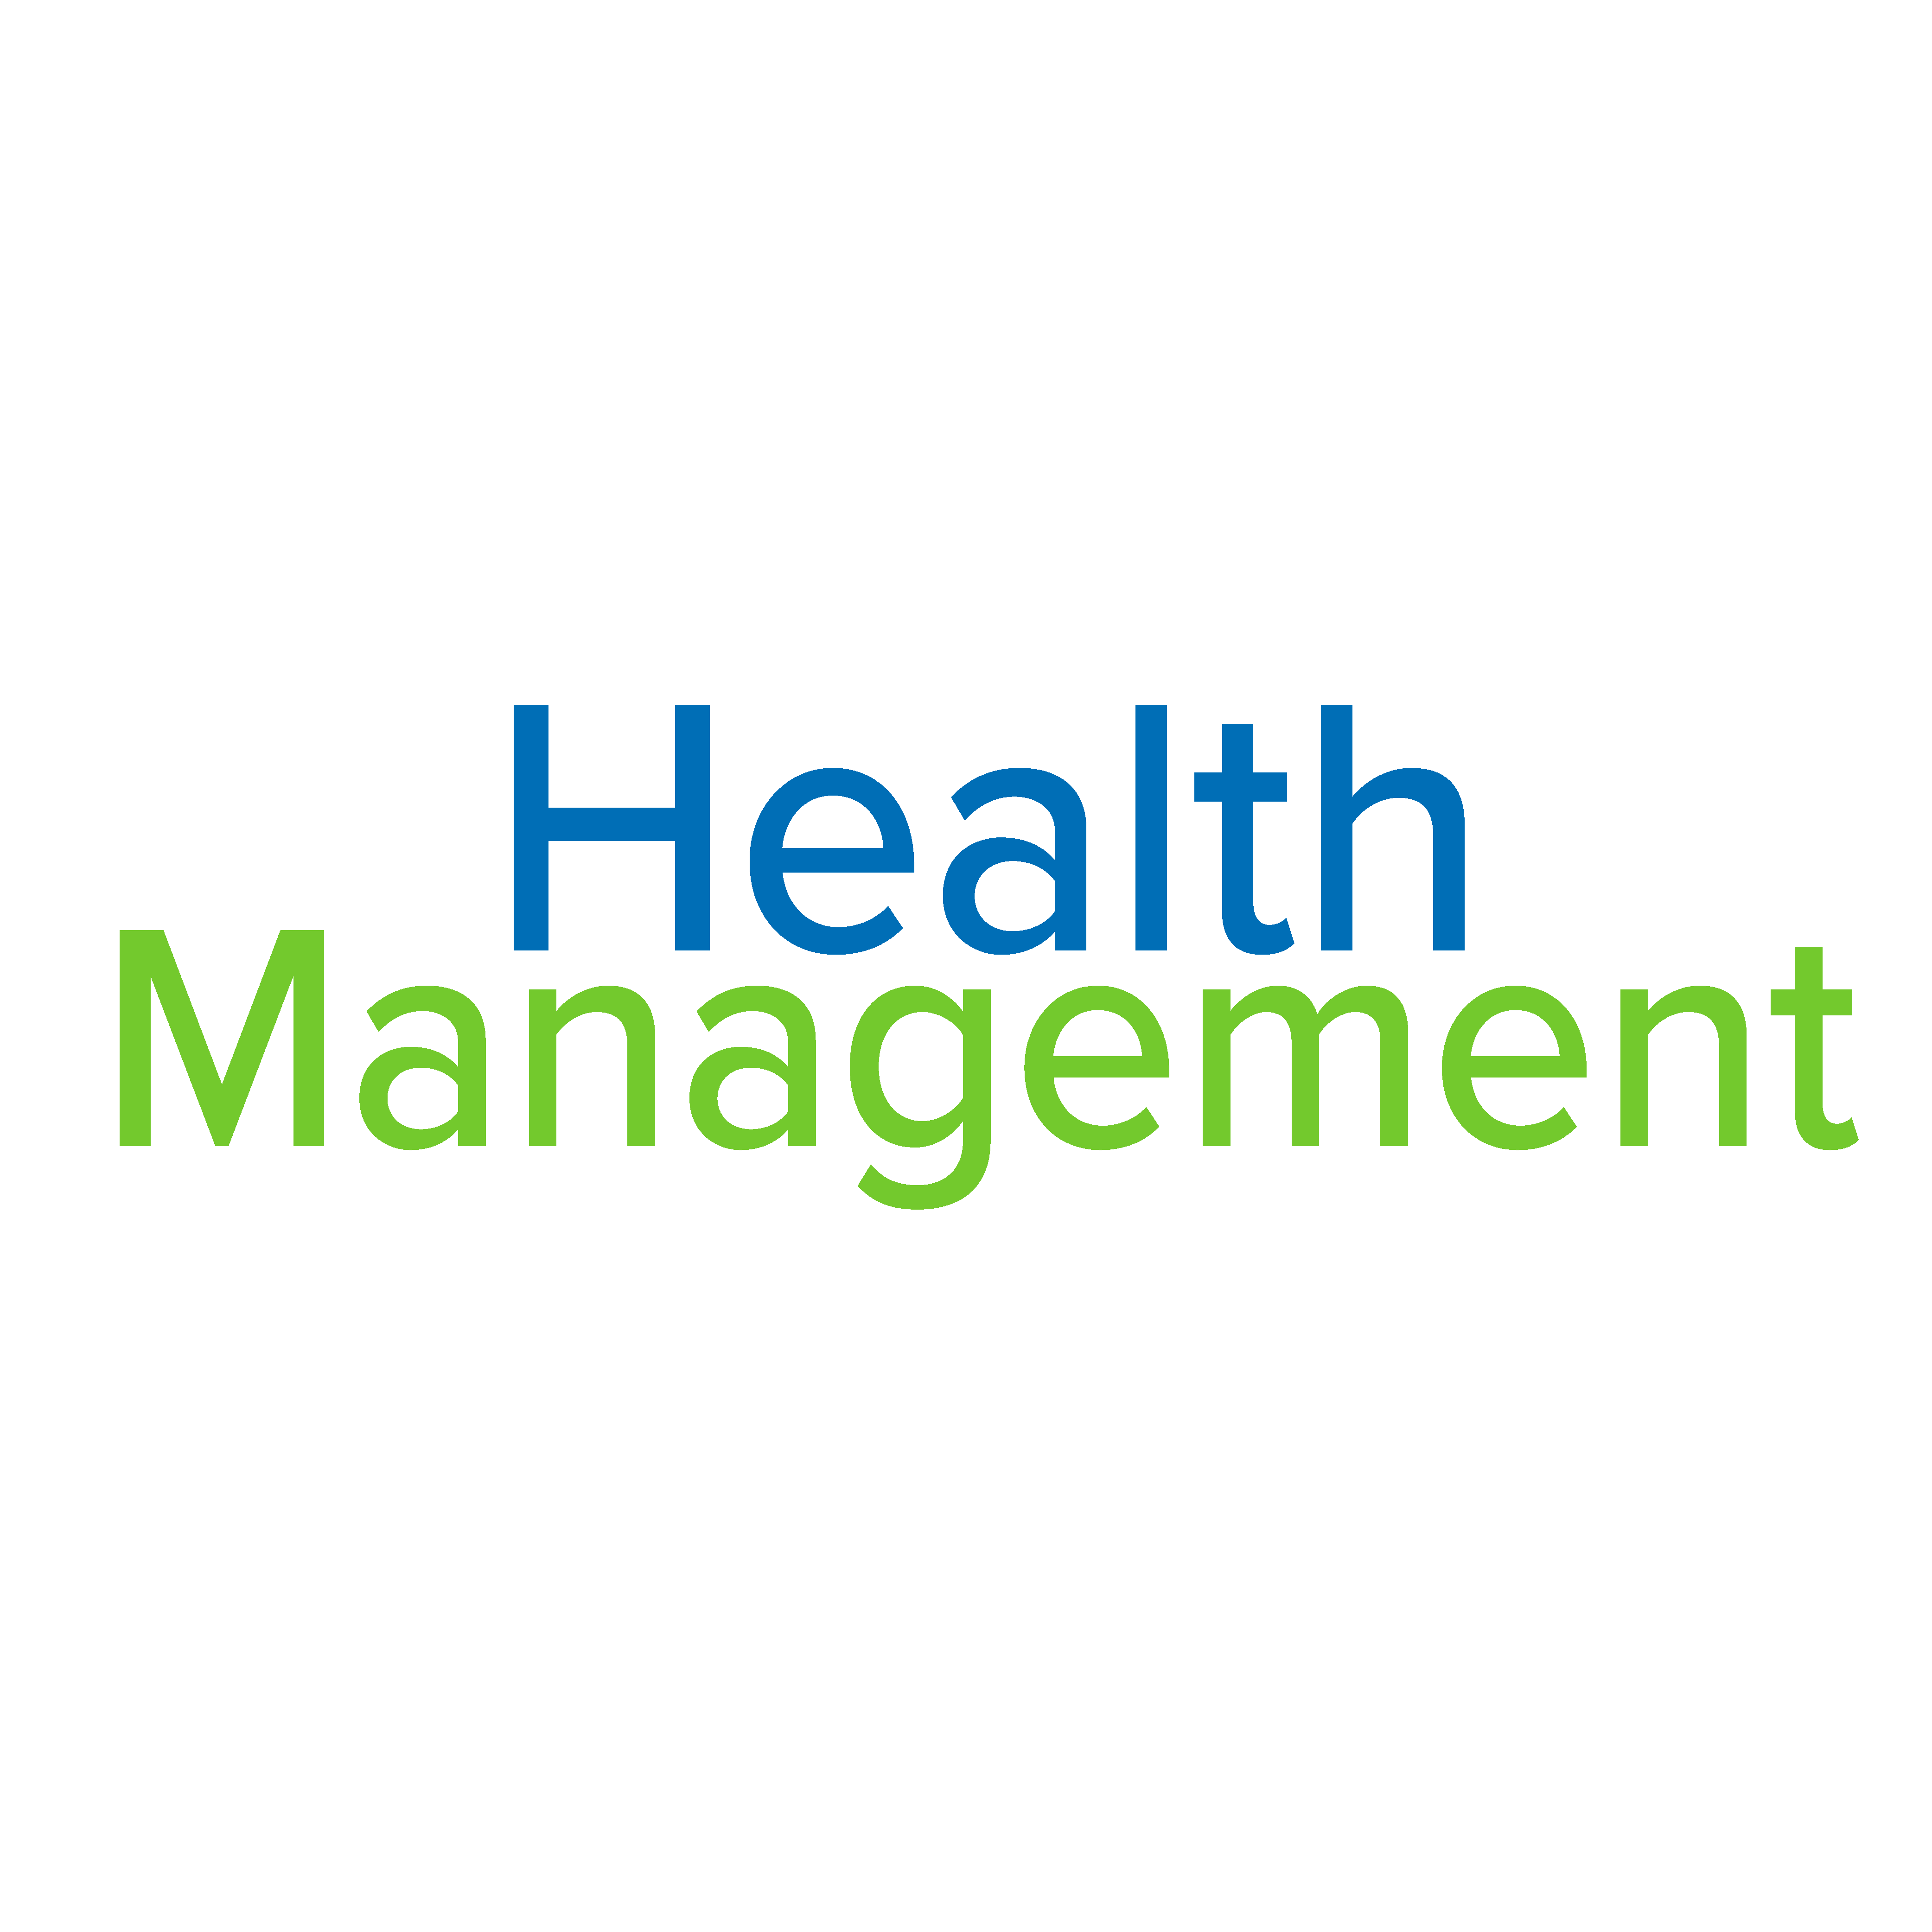 Health Management Brokers - Butler, PA 16001 - (724)822-0388 | ShowMeLocal.com